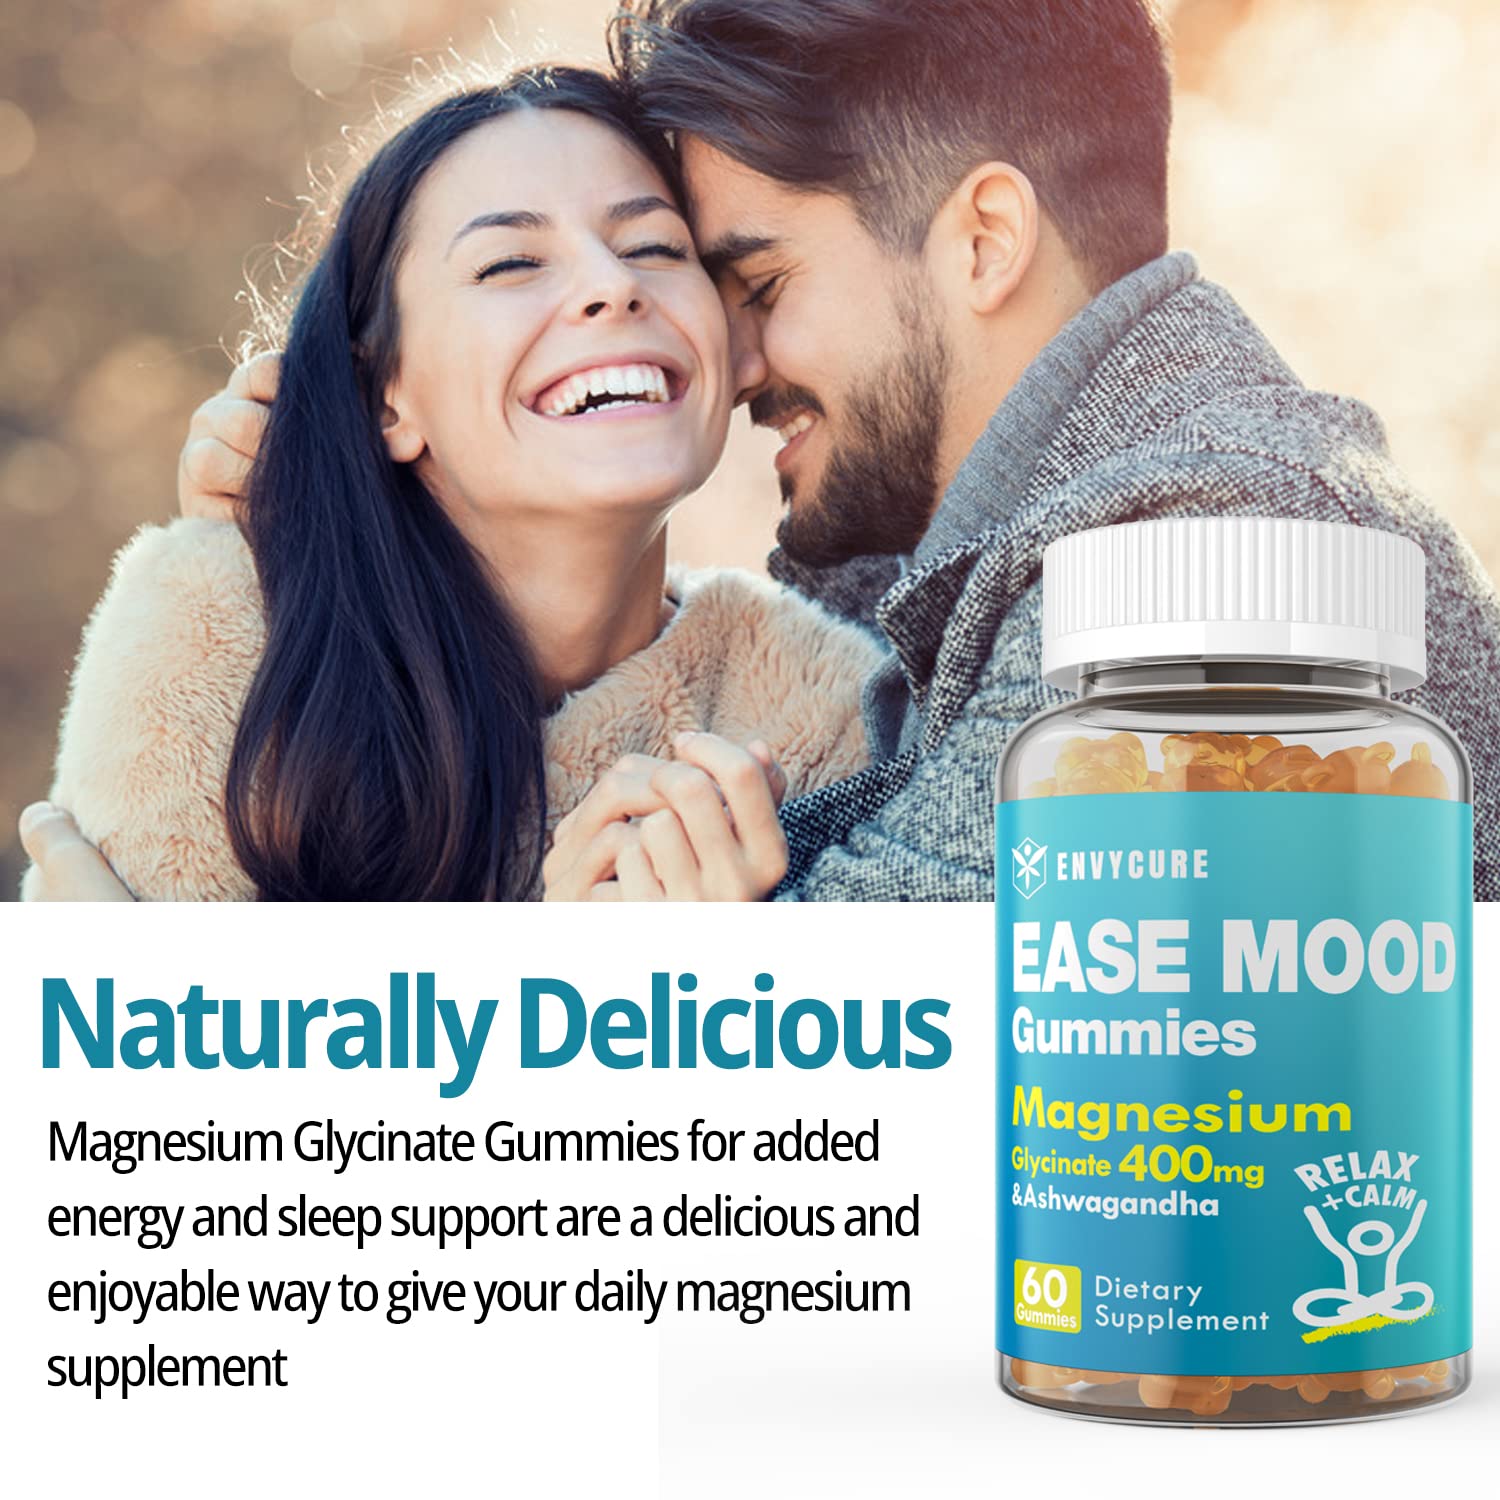 Magnesium Glycinate Gummies 400mg with Ashwagandha, B1, B3, Rhodiola Rosea & Saffron for Support Rest, Mood & Energy - Calm Magnesium Gummies for Adults, Chewable Magnesium Supplement, 120 Count